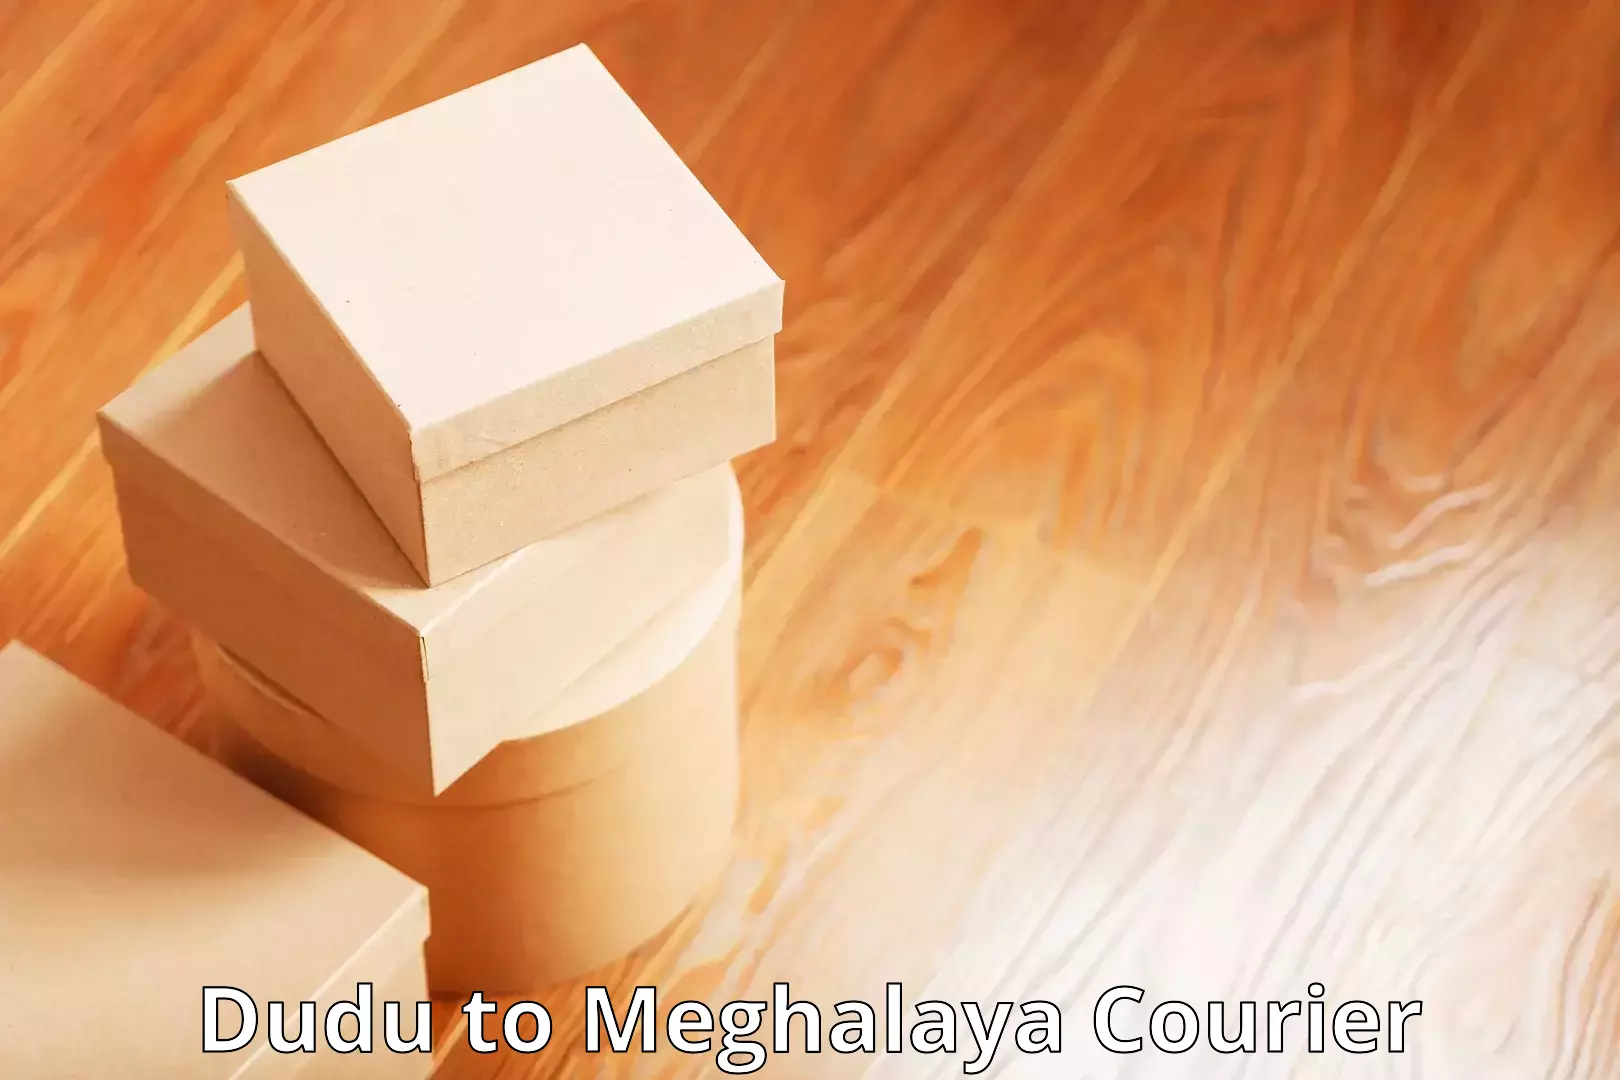 Fast delivery service Dudu to Meghalaya